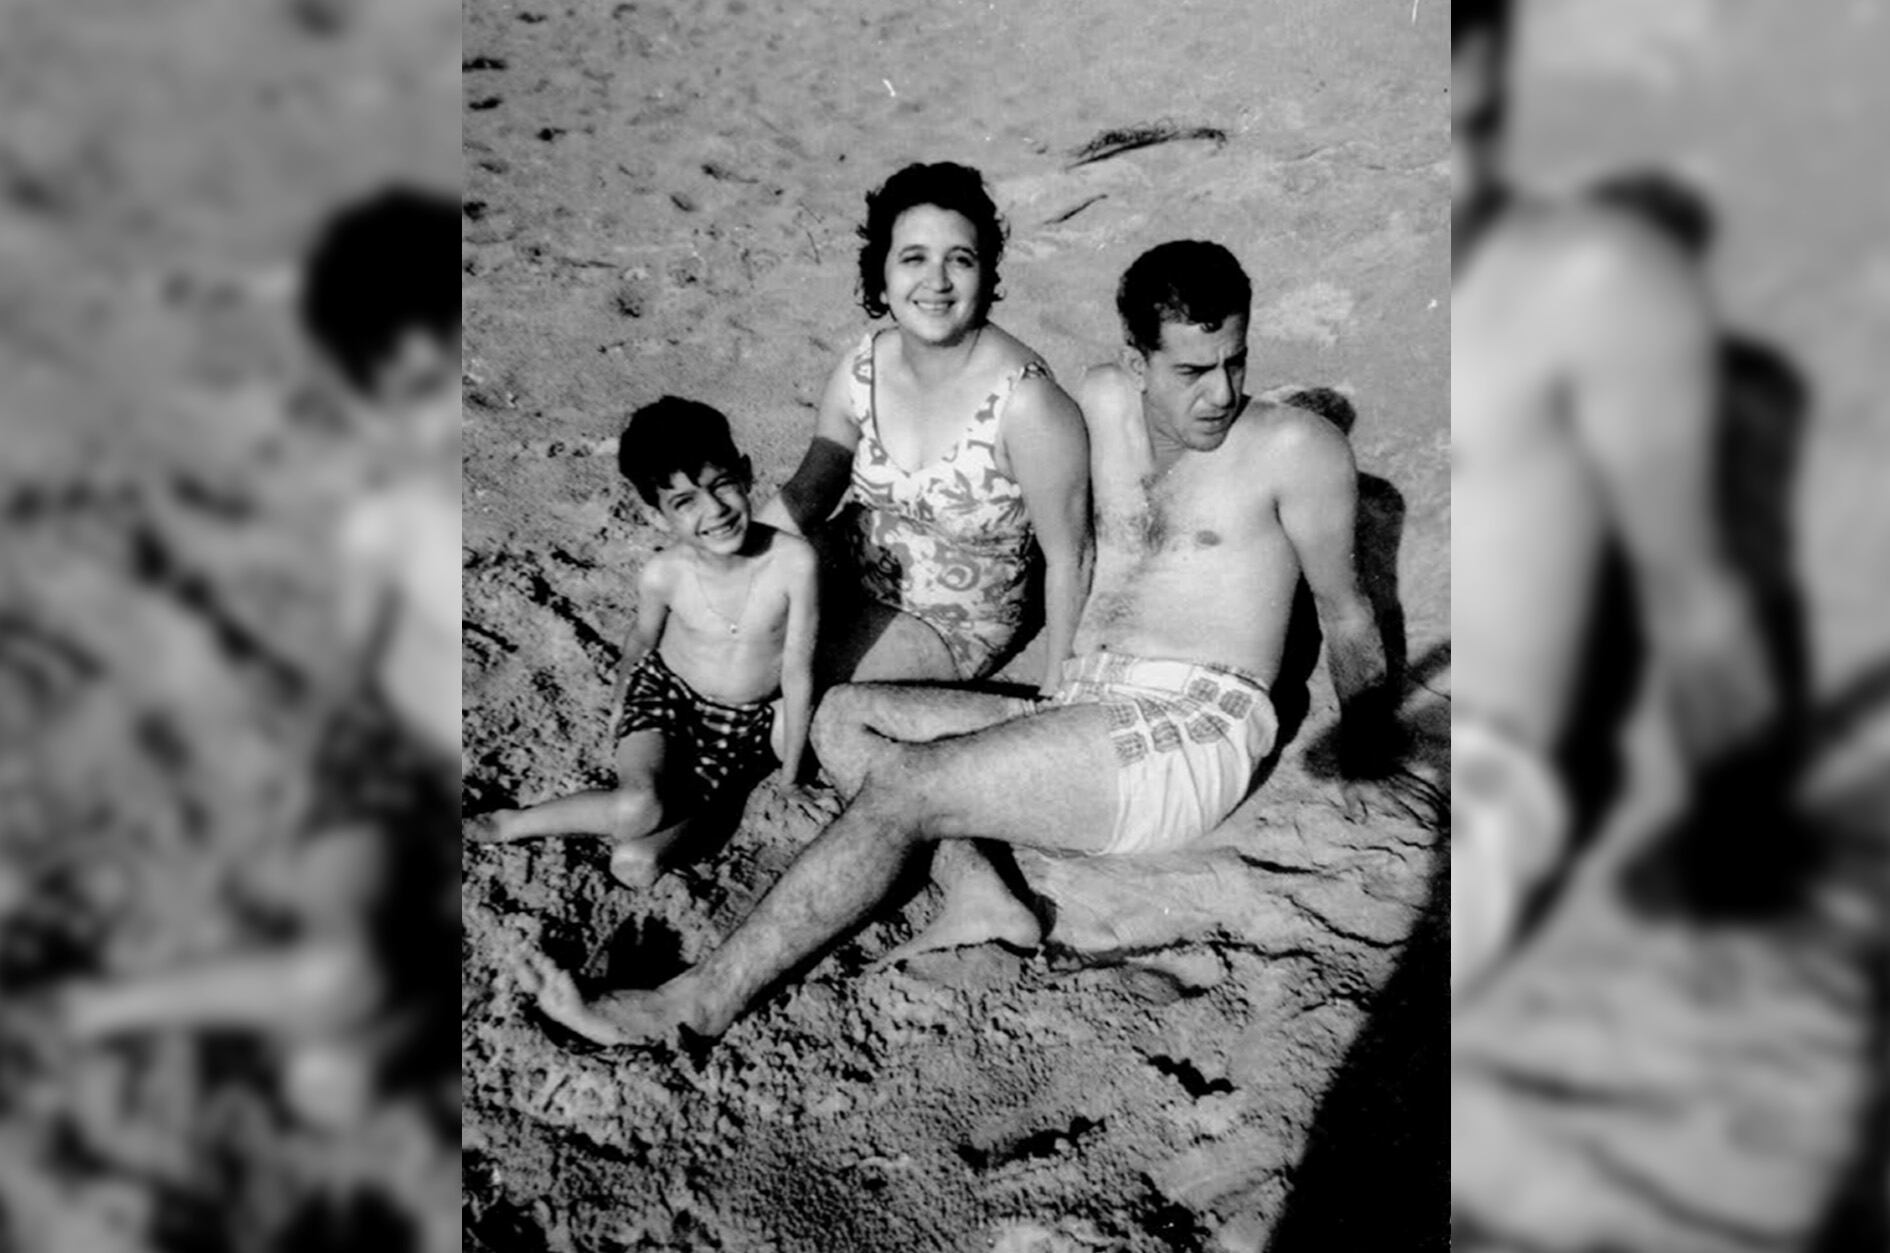 Luis A. Miranda Jr. as a child with his mother, Eva, and father, Güisin, in the summer of 1958, at Cerro Gordo beach (Puerto Rico).